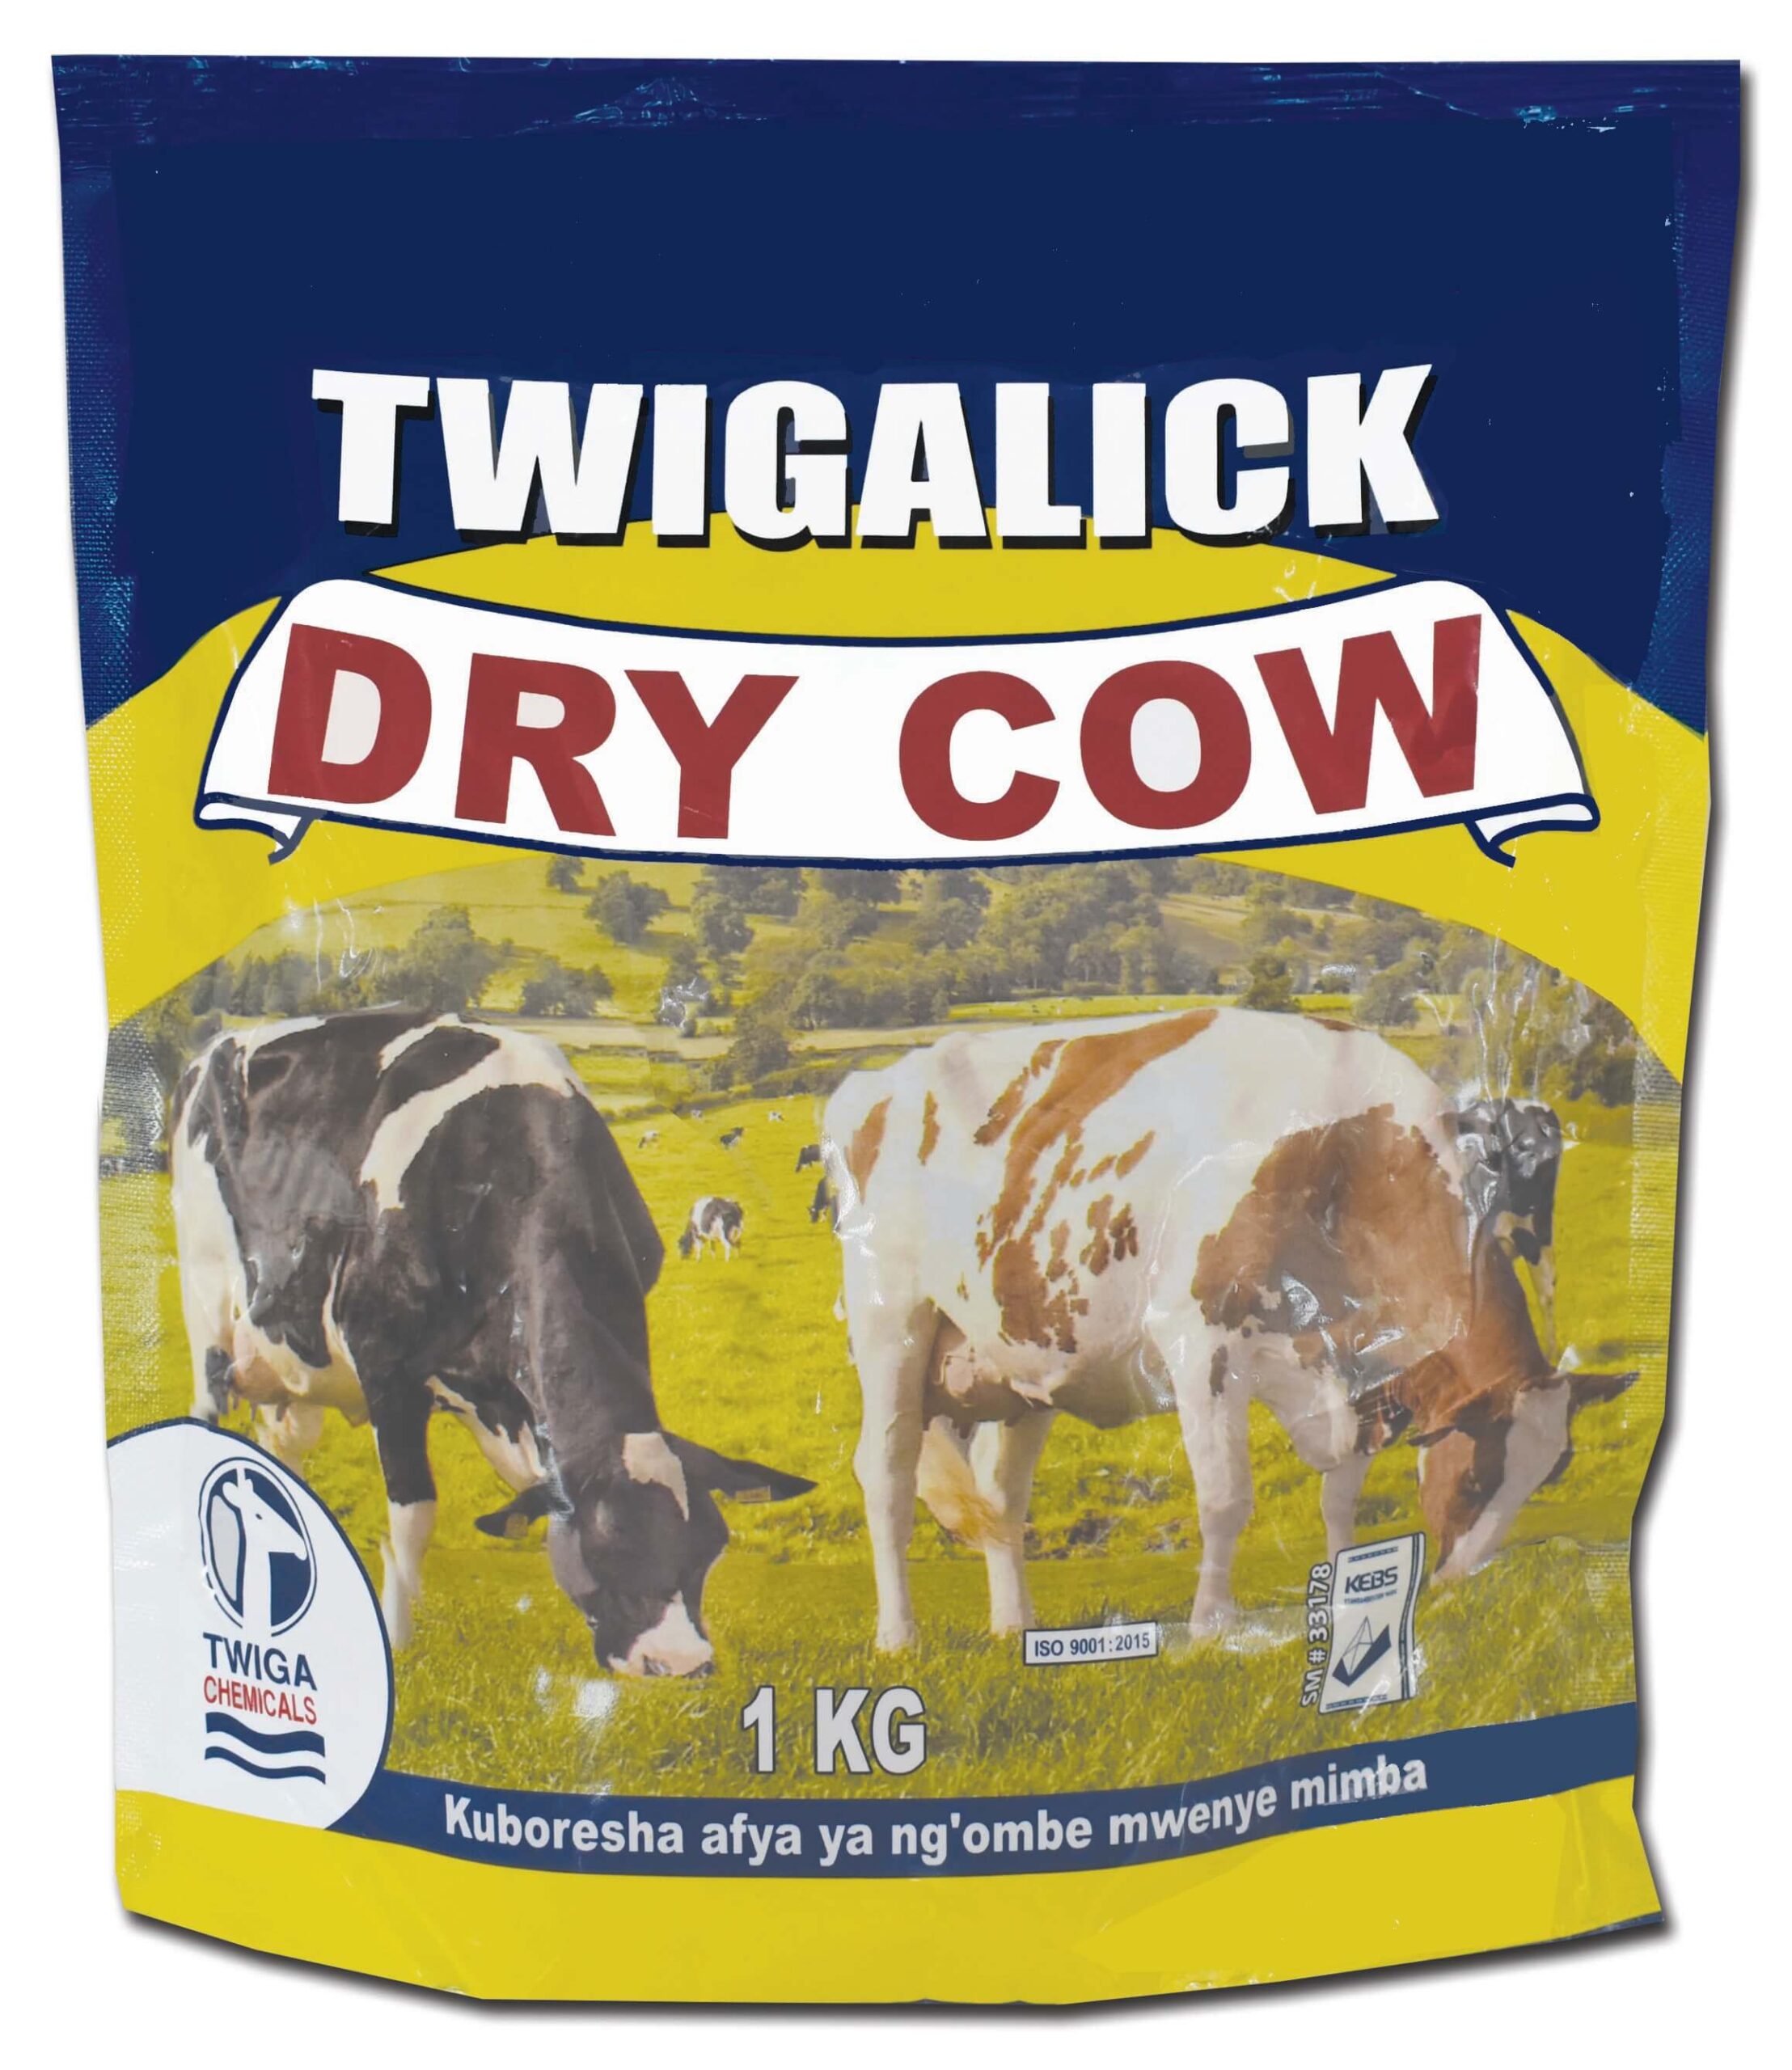 Twigalick Dry Cow